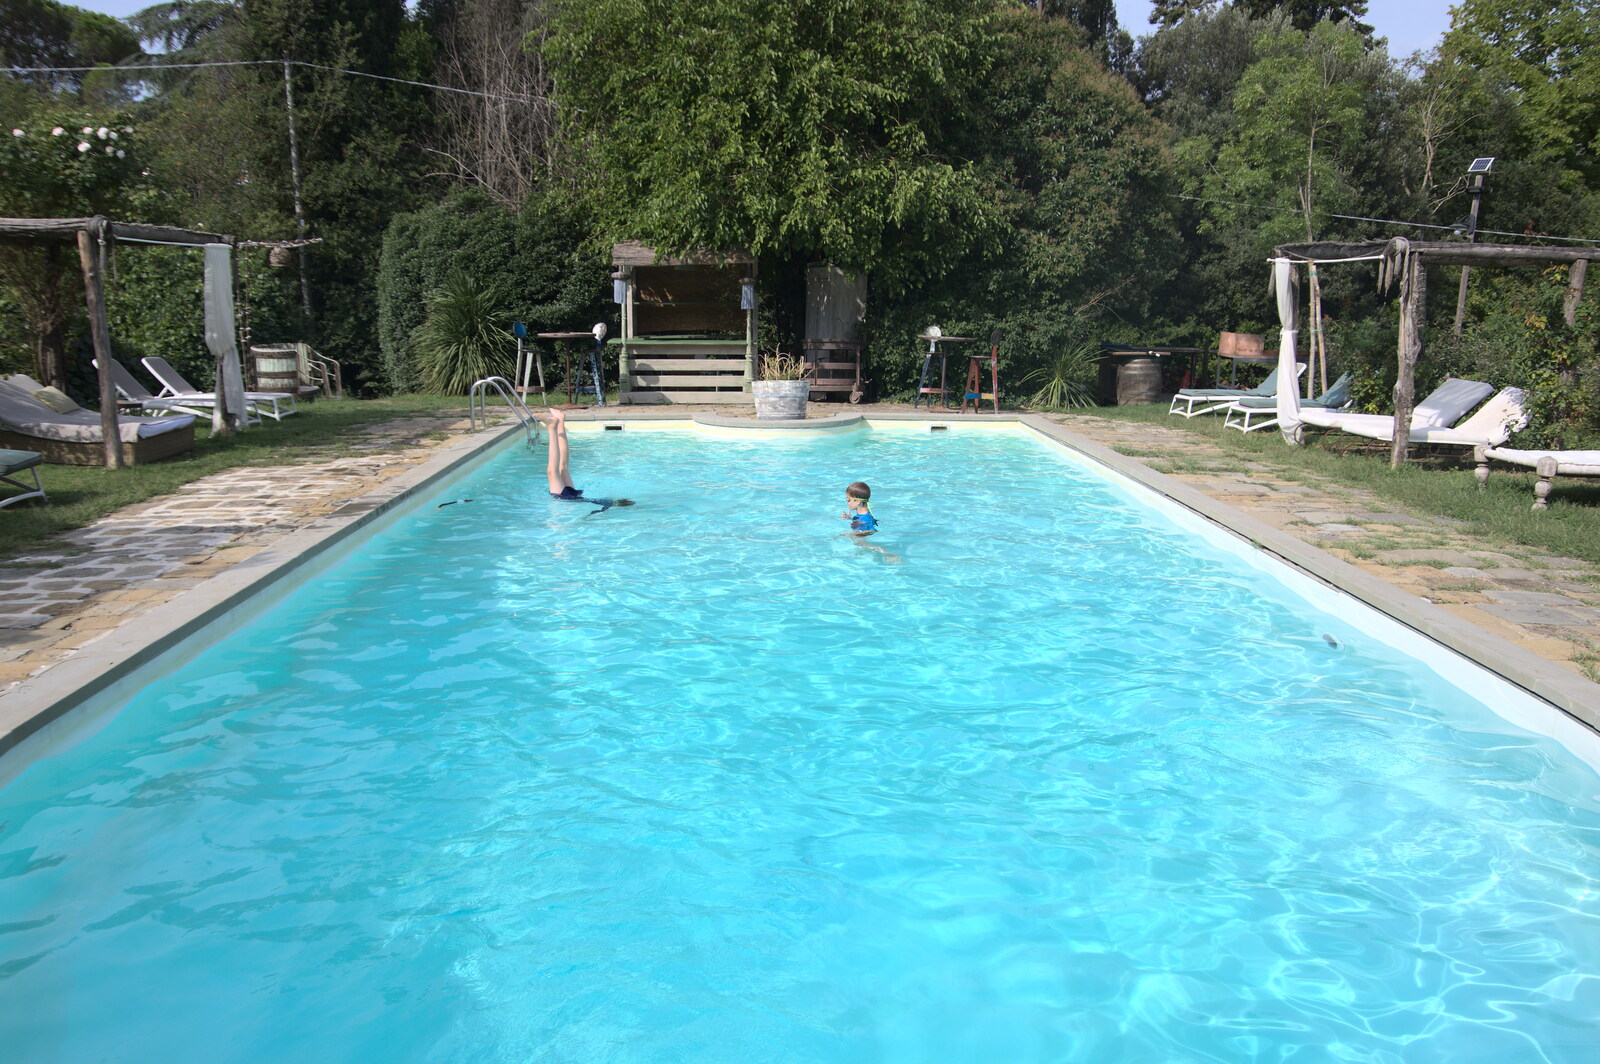 The Flags of Arezzo, Tuscany, Italy - 28th August 2022: The boys are loving the pool